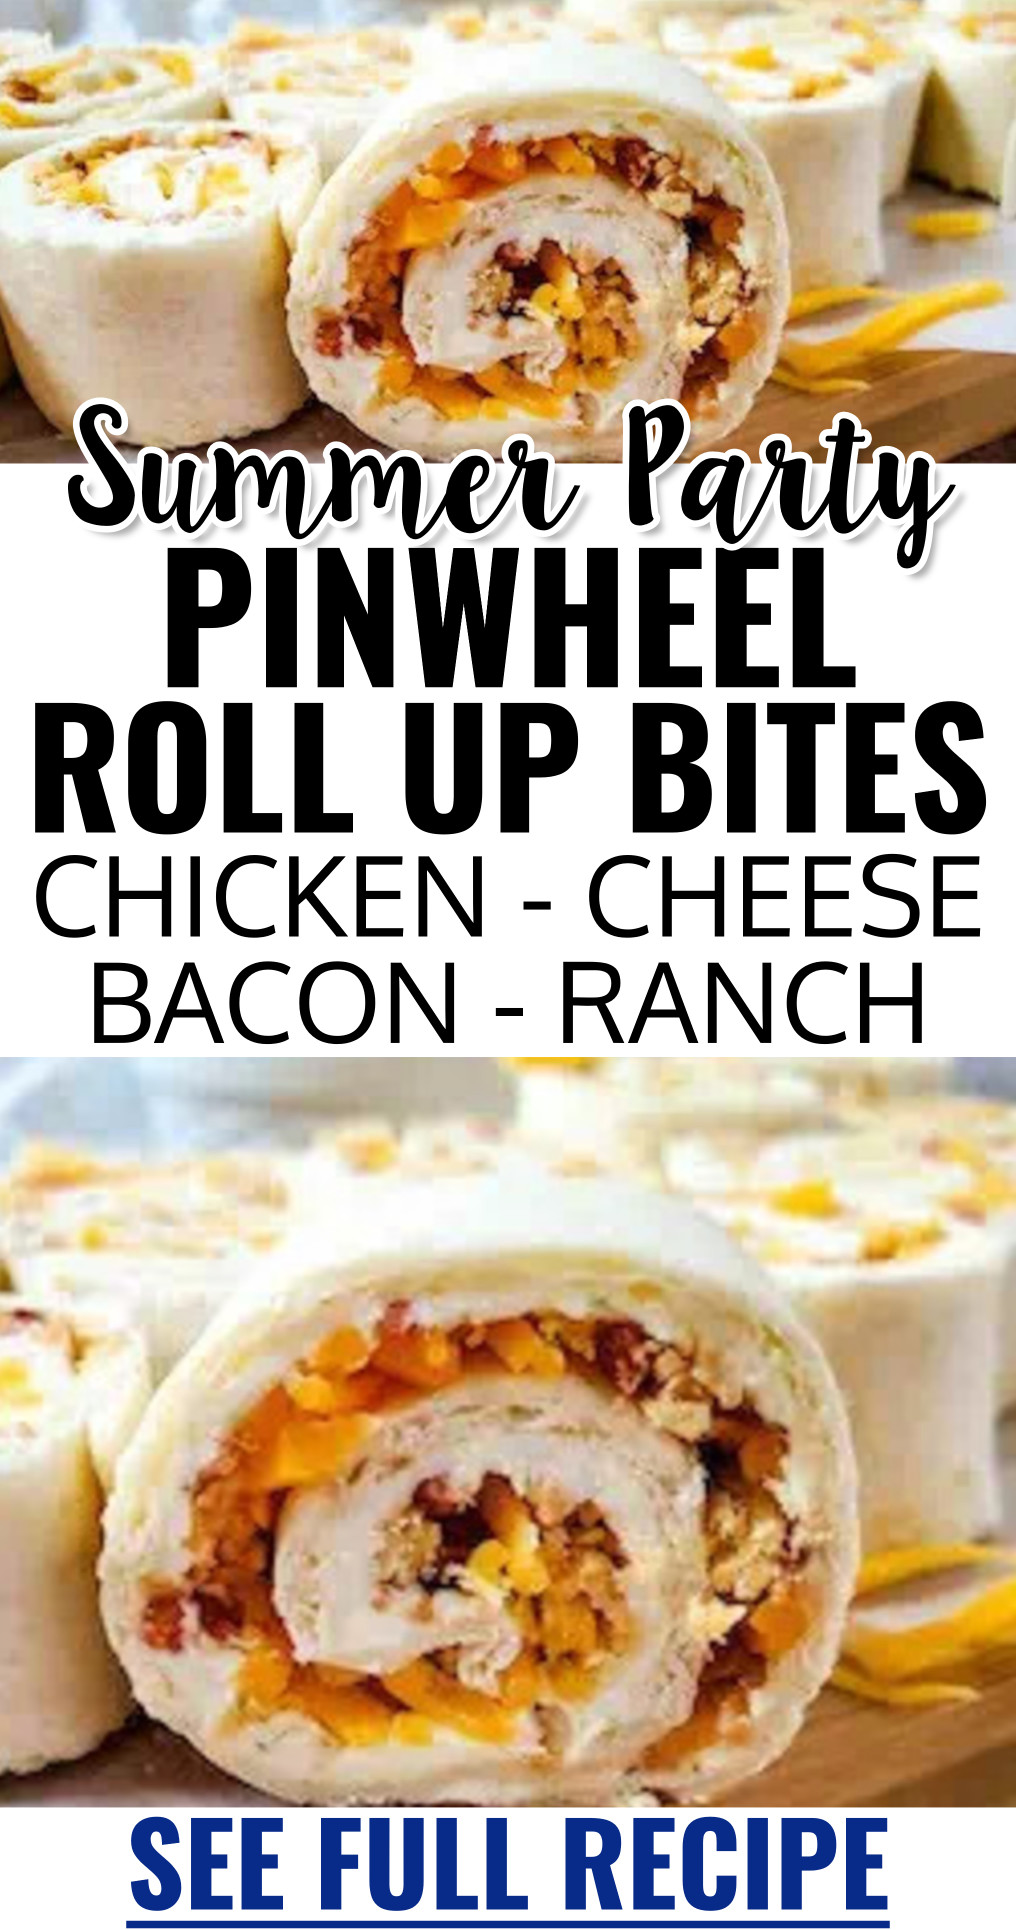 Summer Party Pinwheel Roll Up Bites Chicken Cheese Bacon Ranch